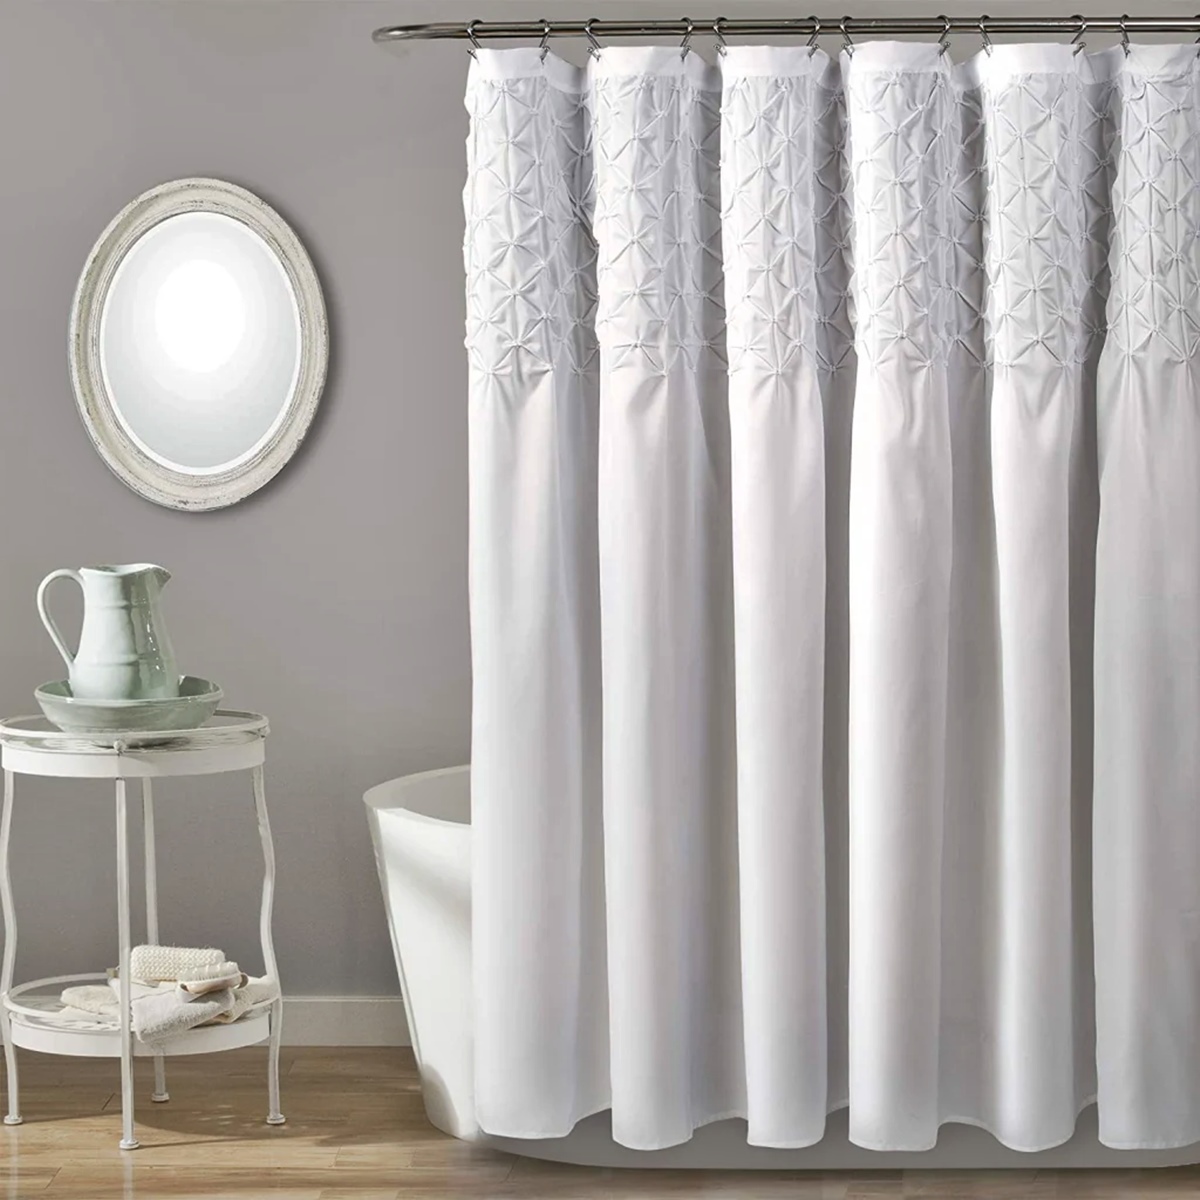 How To Make A Shower Curtain Look Good | CitizenSide